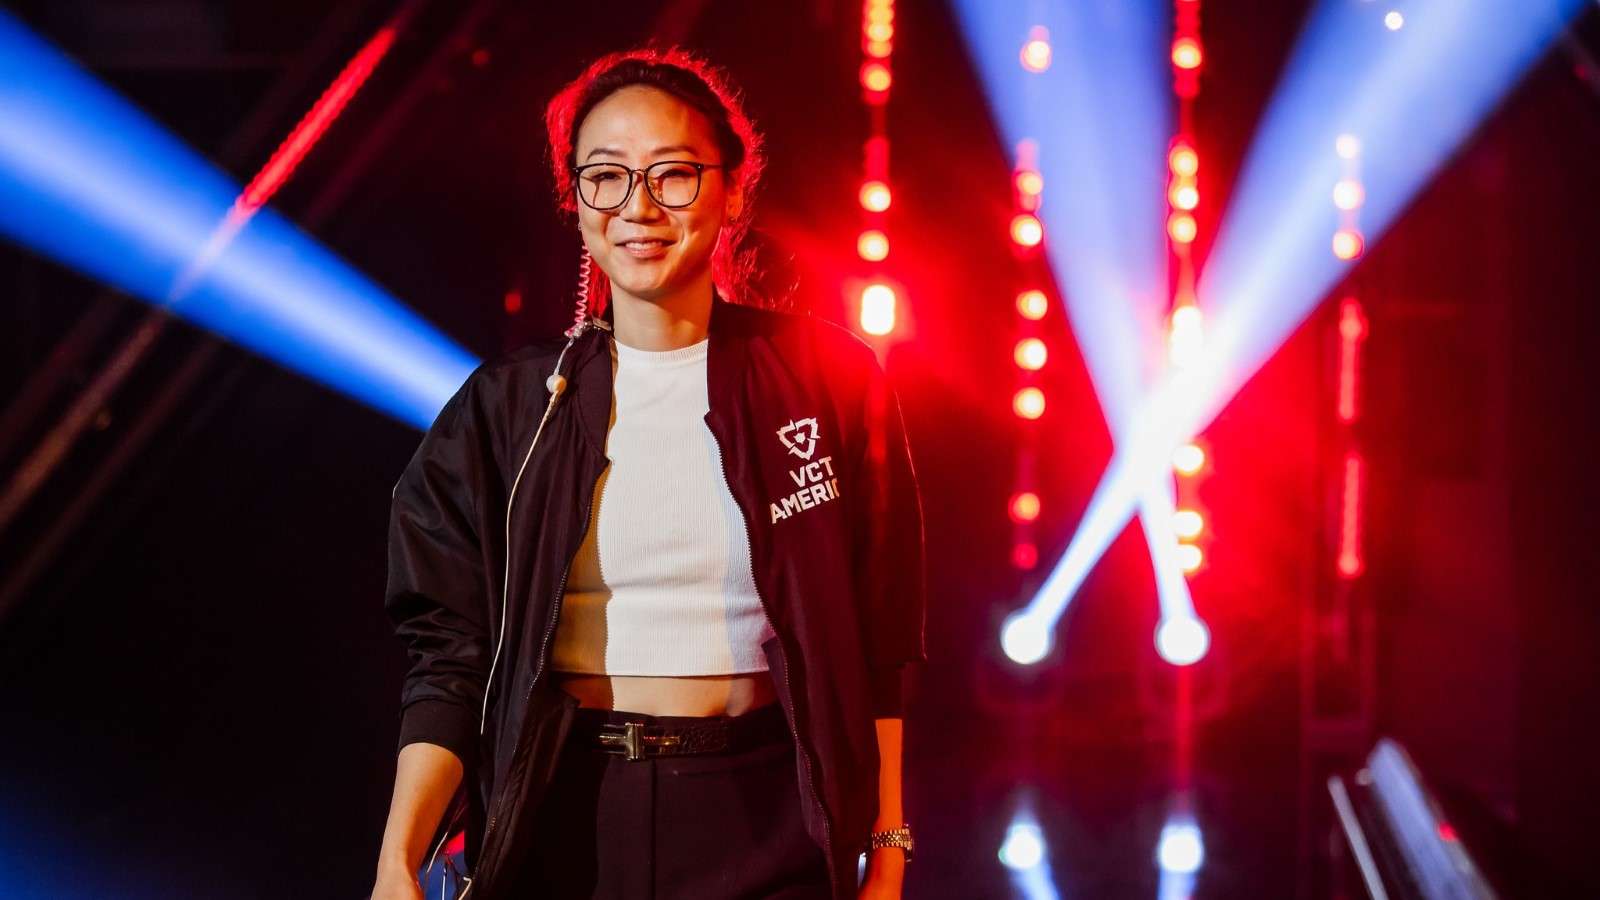 EG coach potter first woman to win major esports championship